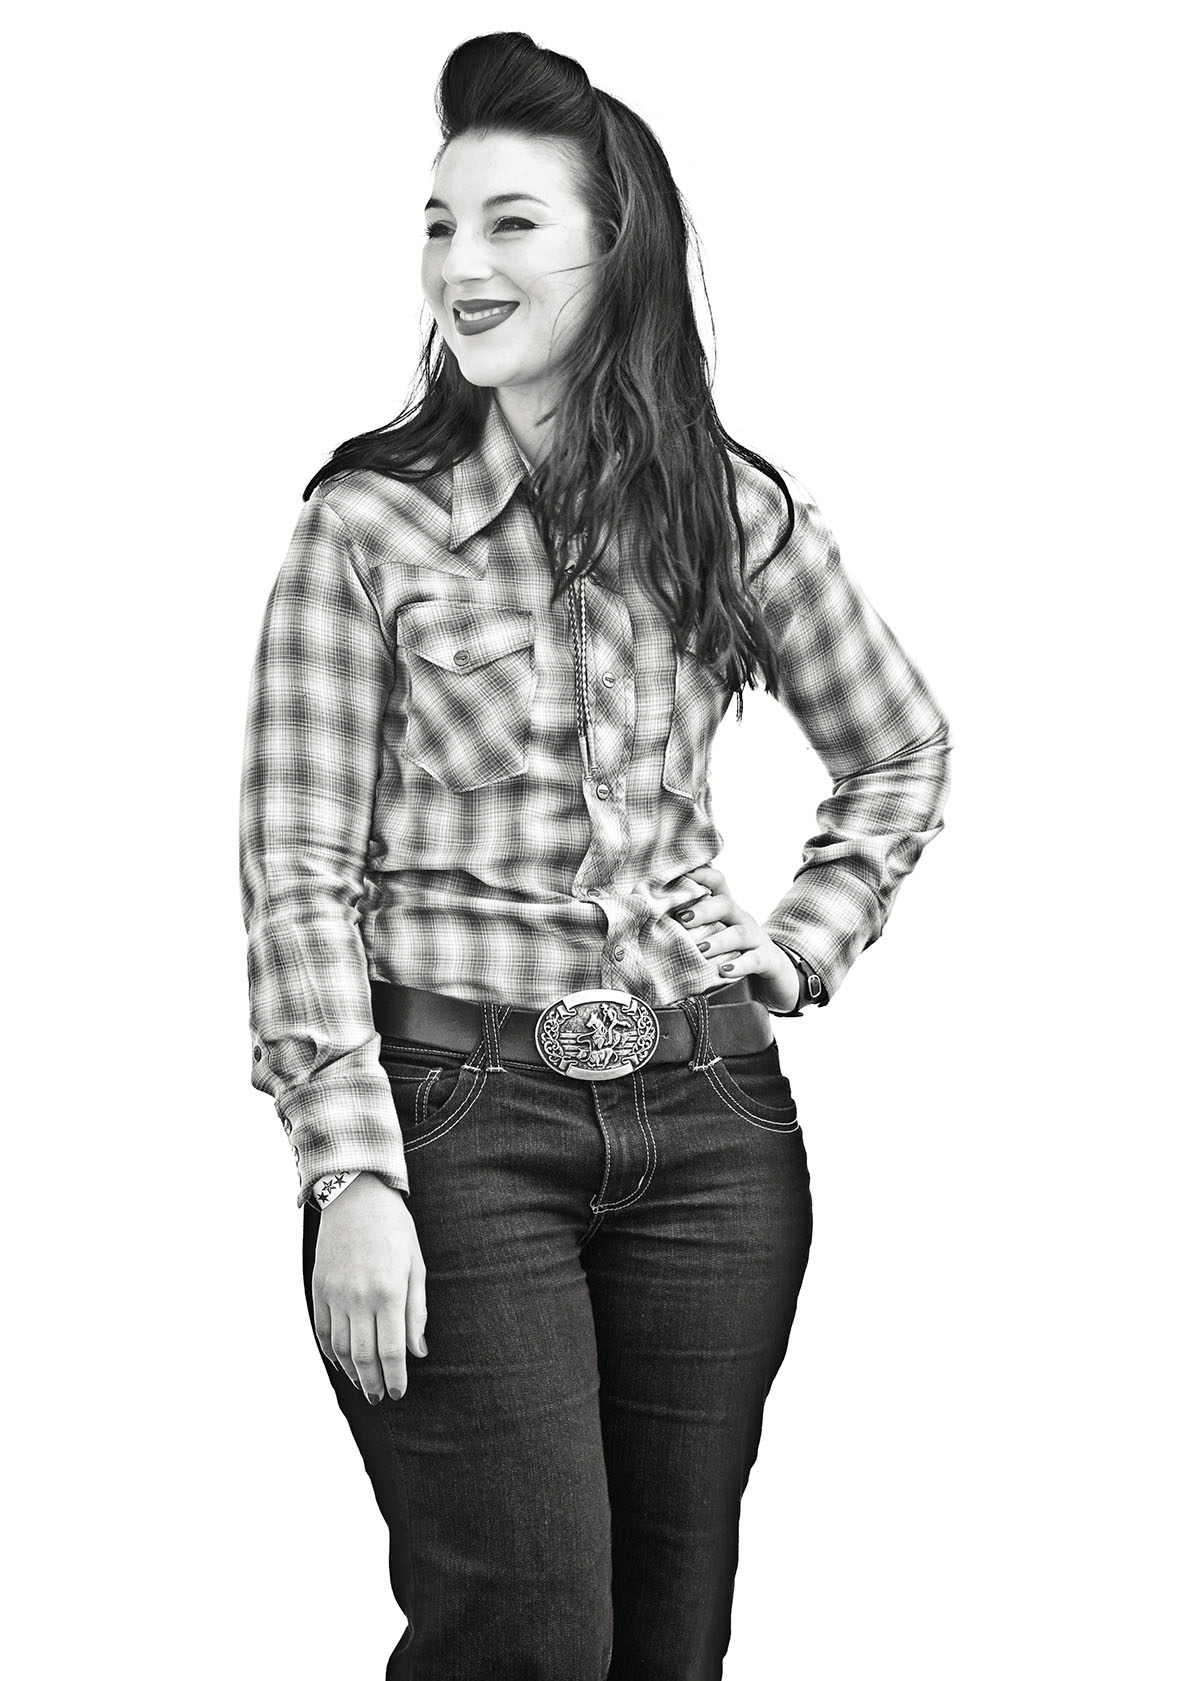 A woman in a plaid shirt and jeans with a large belt buckle poses with her hand on her hip